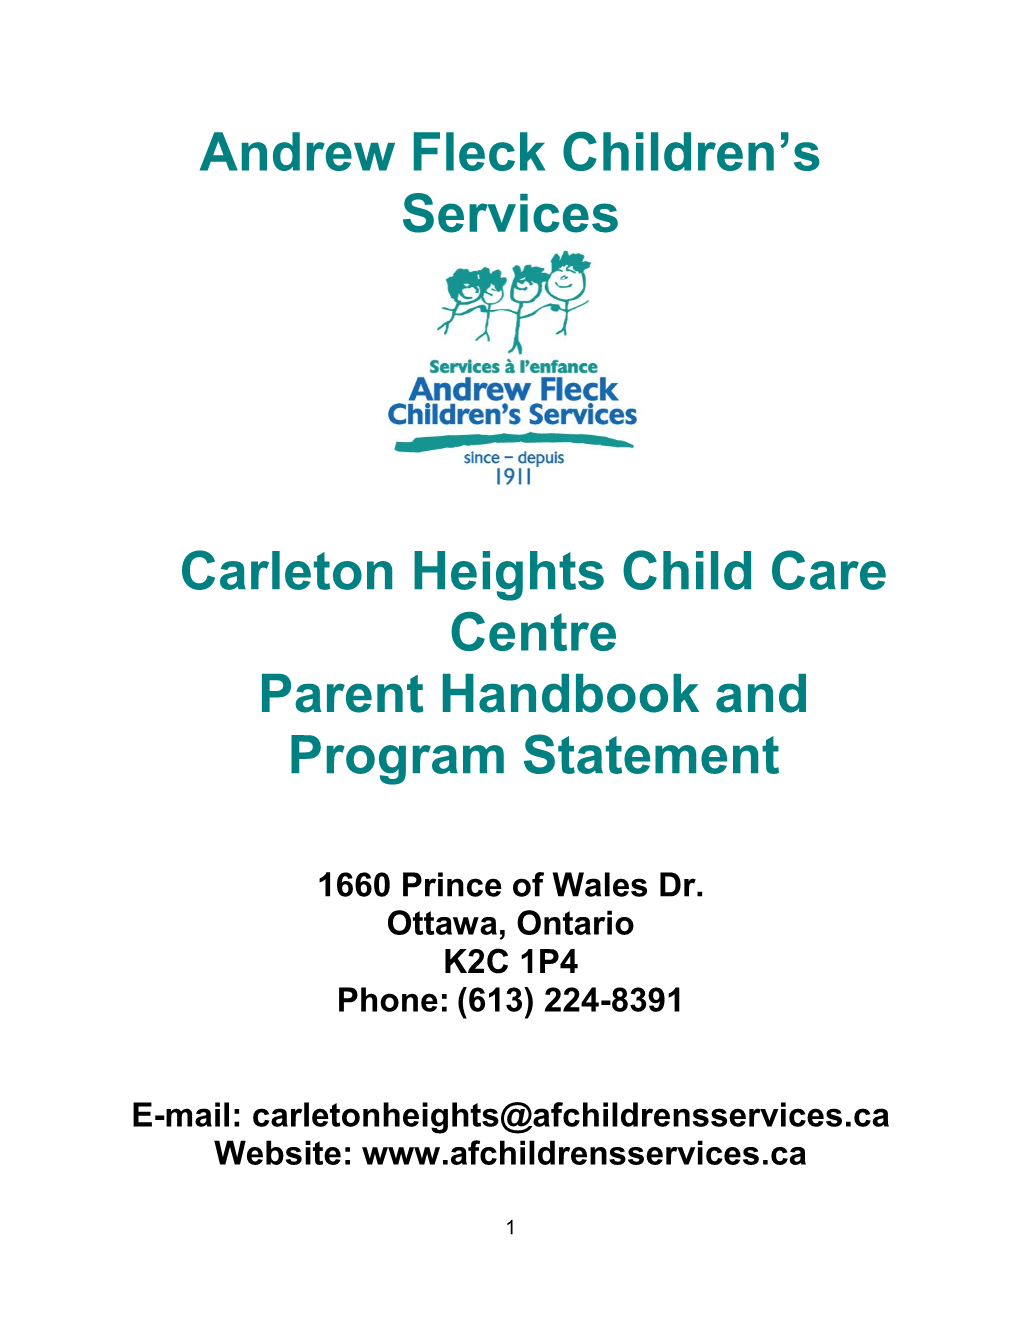 Andrew Fleck Children's Services Carleton Heights Child Care Centre